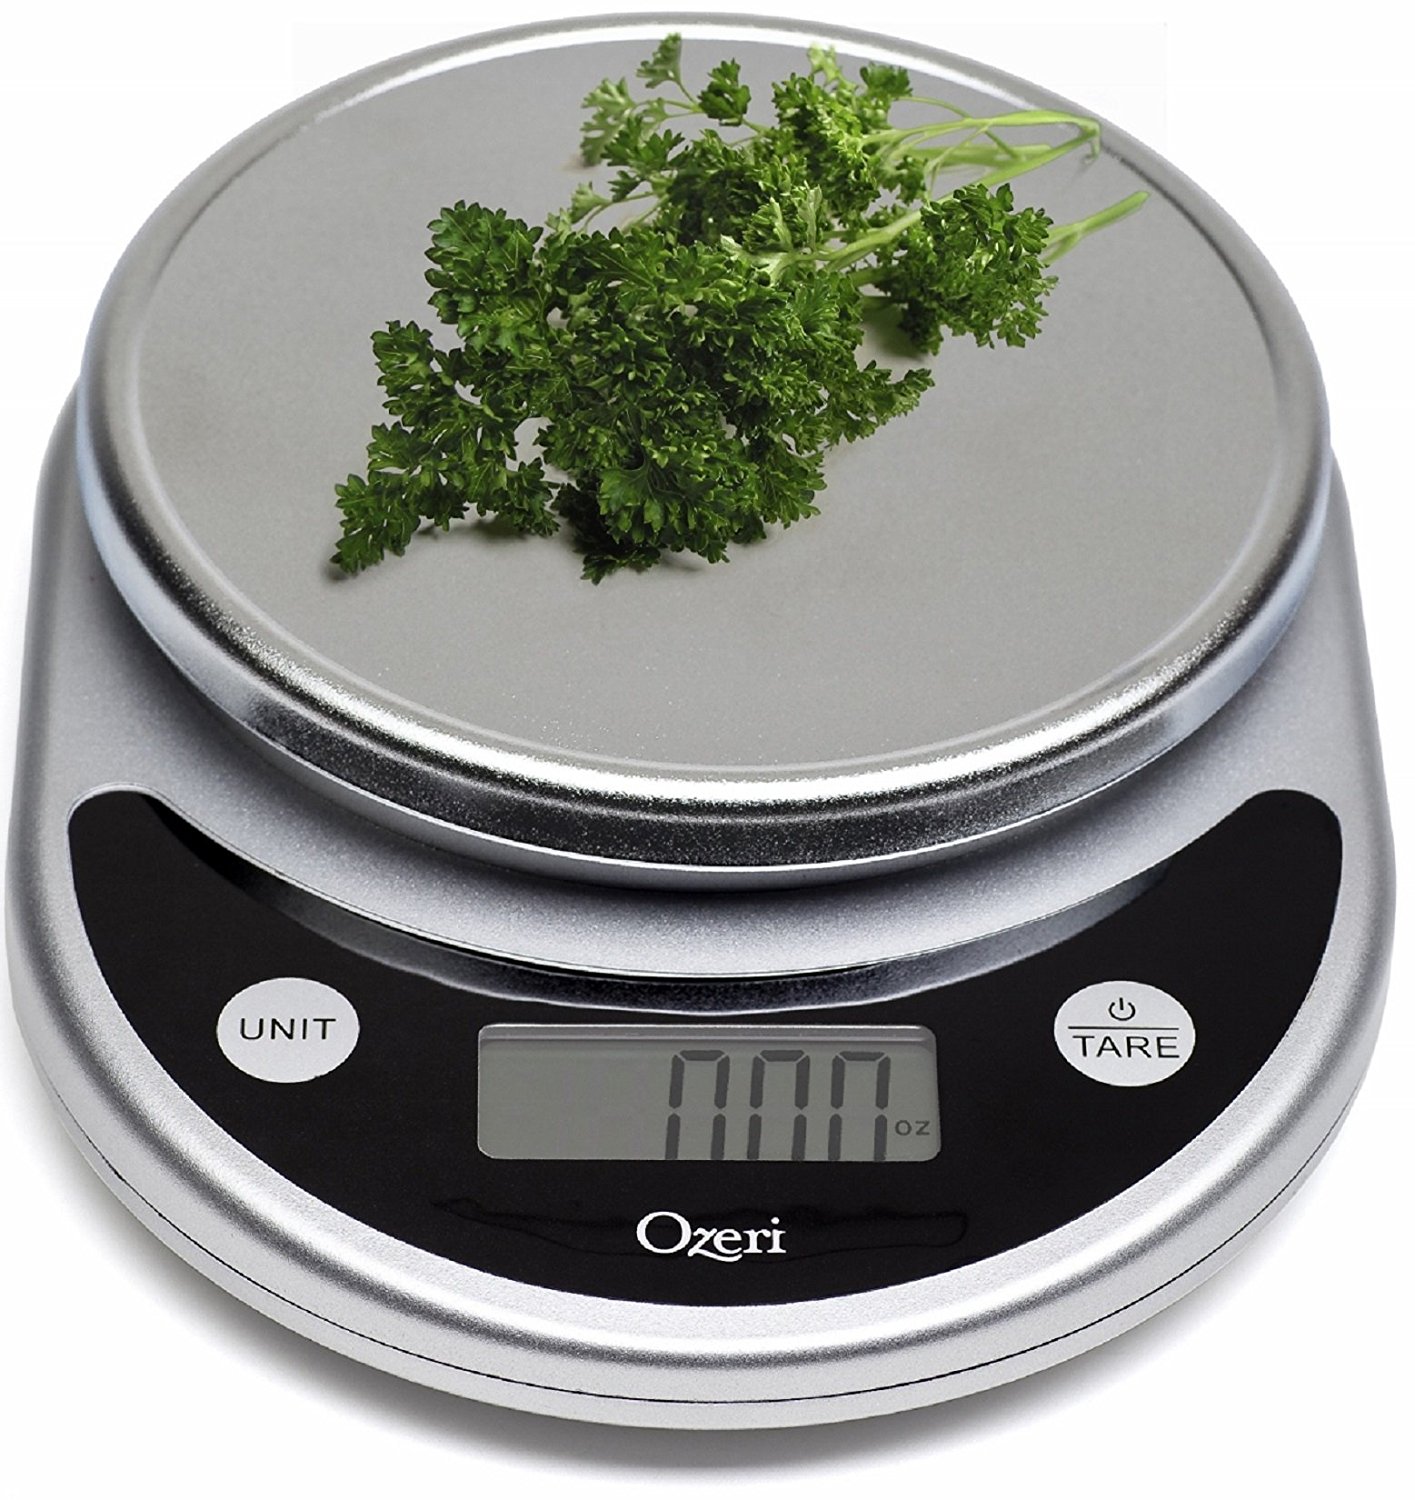 Digital Kitchen Scale Review For Perfect Weight Ingredients HomeInDec